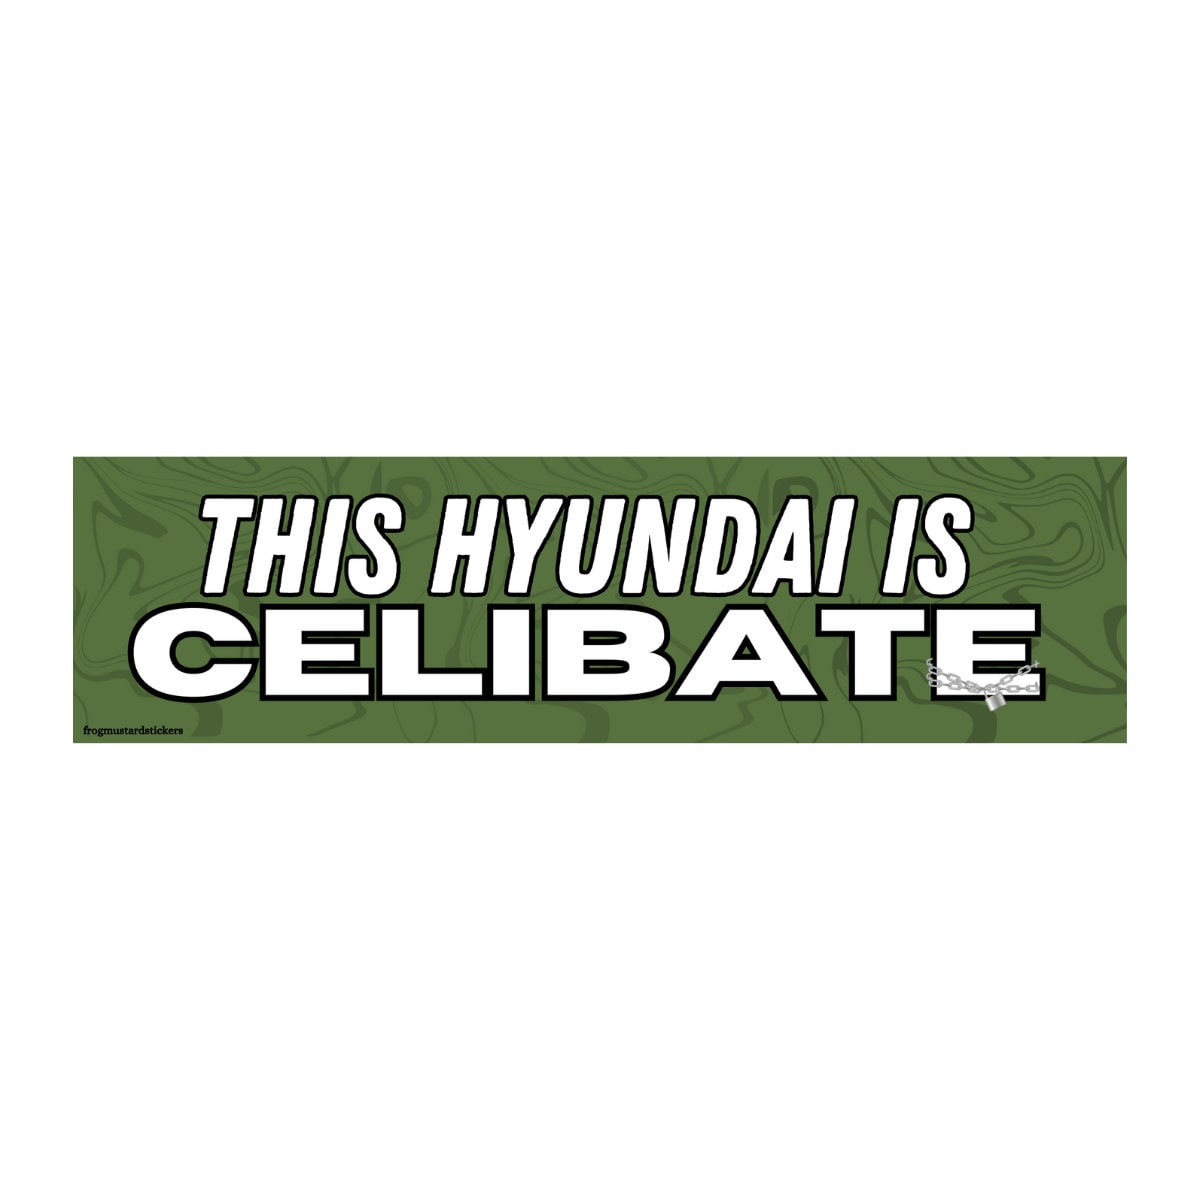 This [Your Car's Make] is CELIBATE - Bumper Sticker or Magnet | Funny Sticker | 8.5" x 2.5" Premium Weather-proof Vinyl